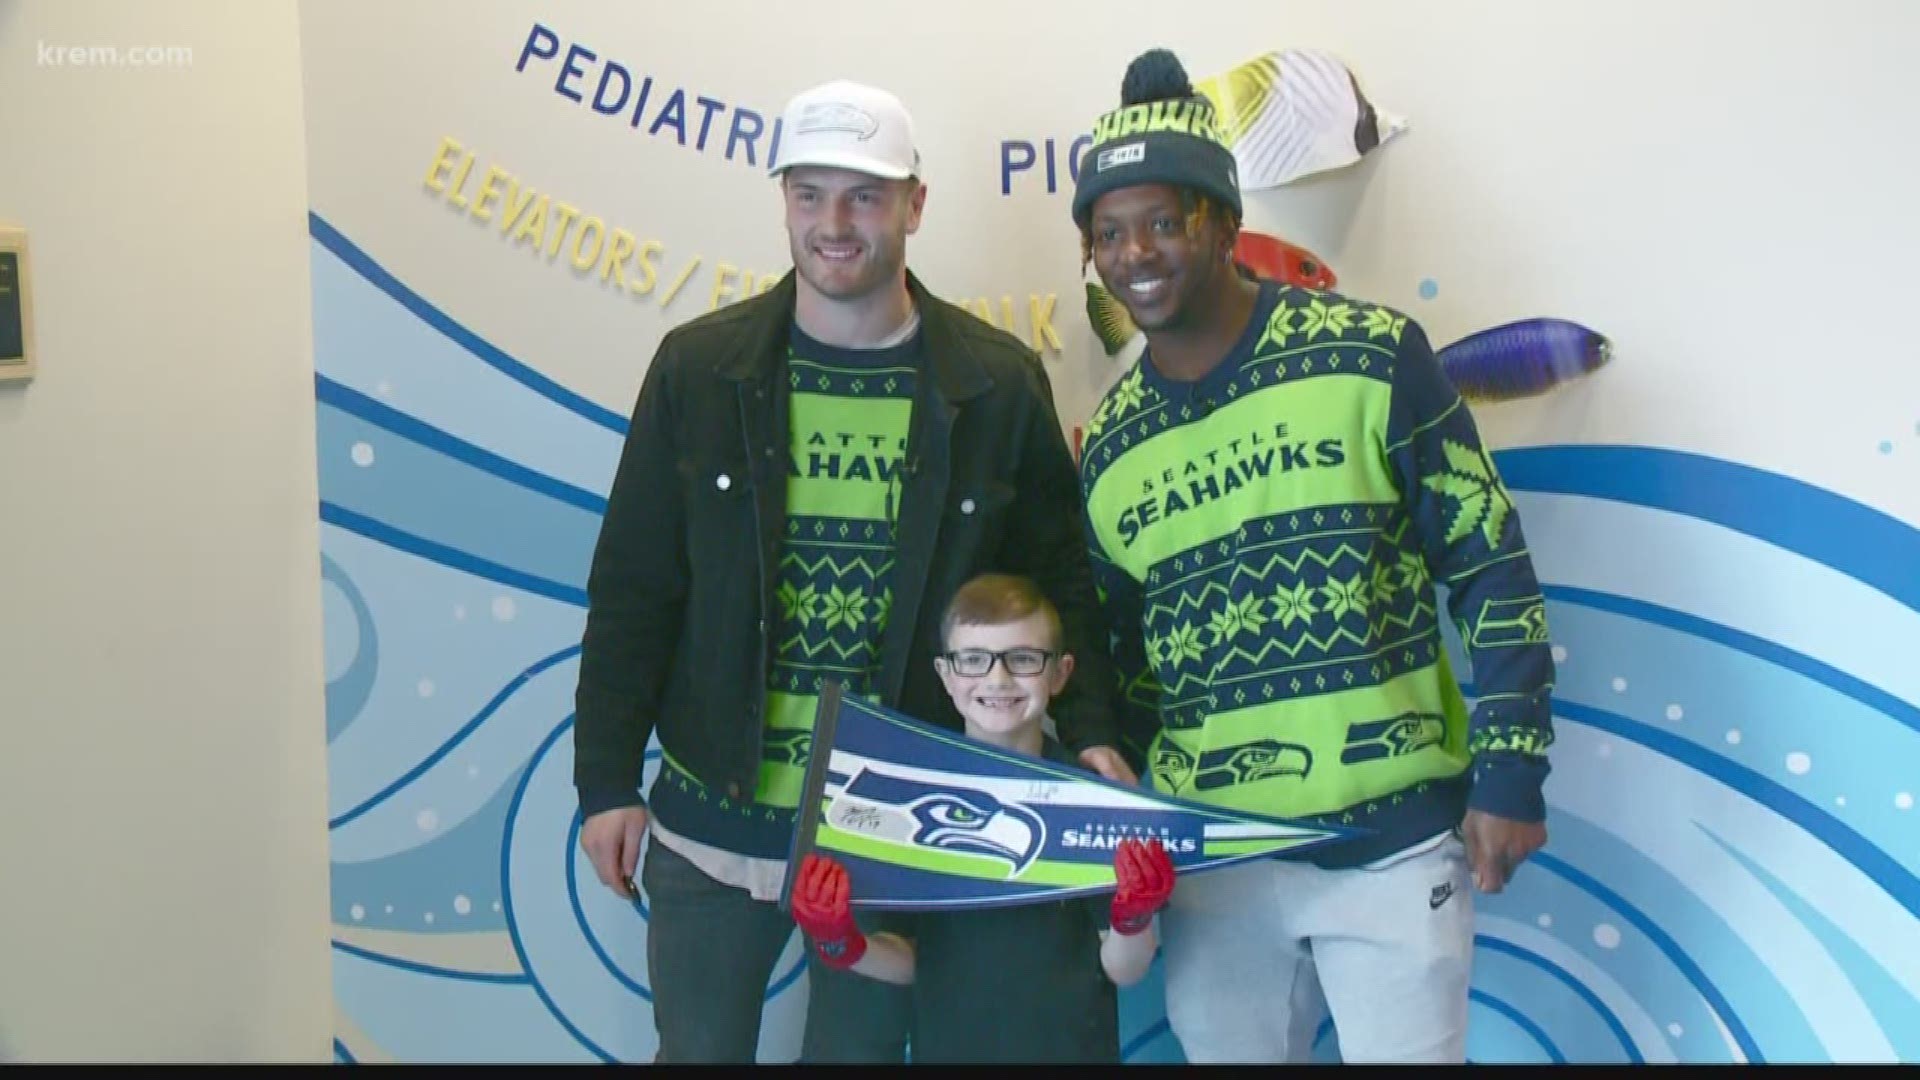 Seattle Seahawks players Jacob Hollister and Malik turner visited children at Spokane's Sacred Heart hospital. They got to meet some of their young fans.